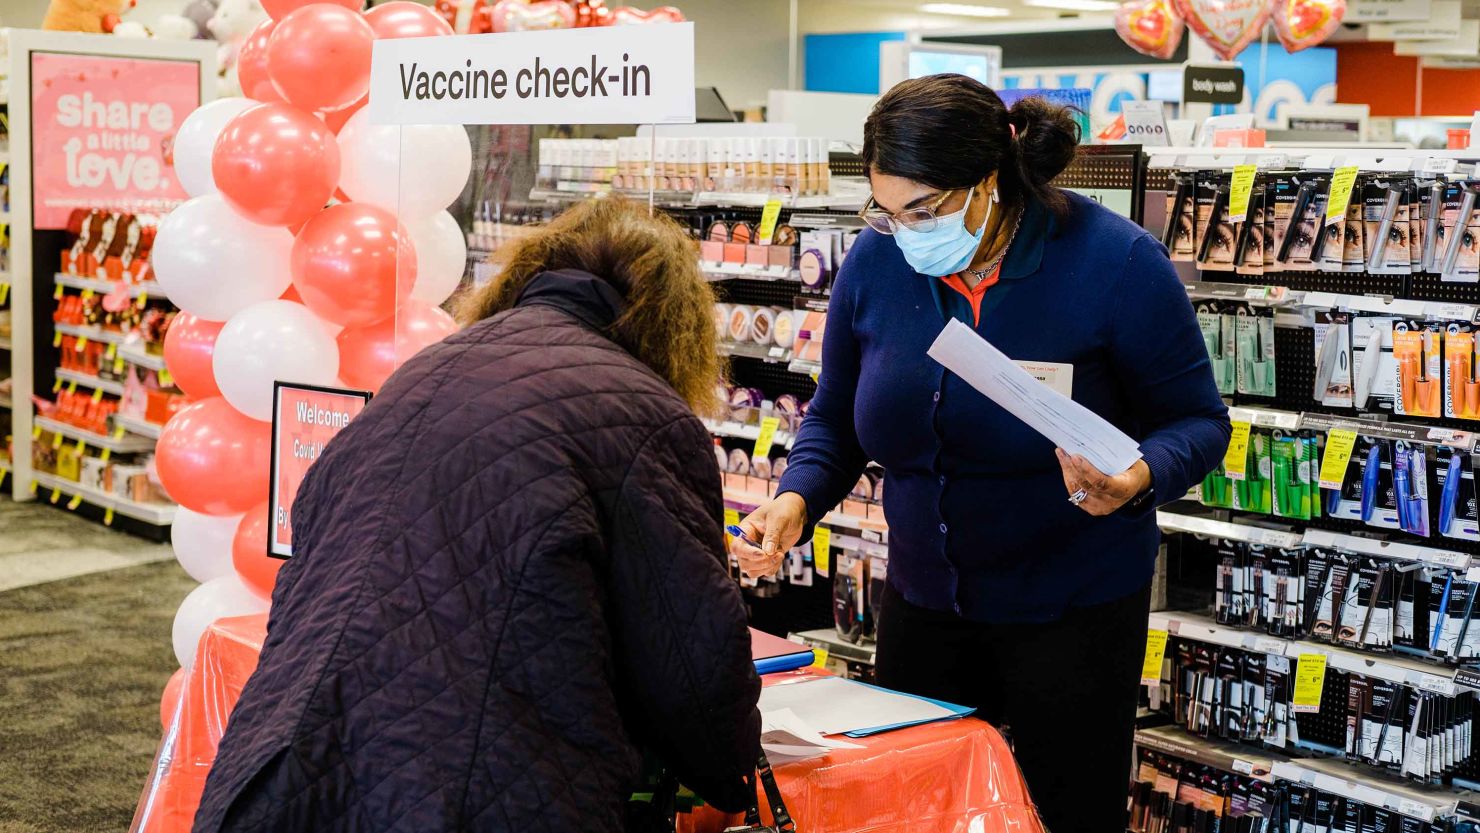 A person gets checked in to receive a Covid-19 vaccine at a CVS Pharmacy location in Eastchester, New York.